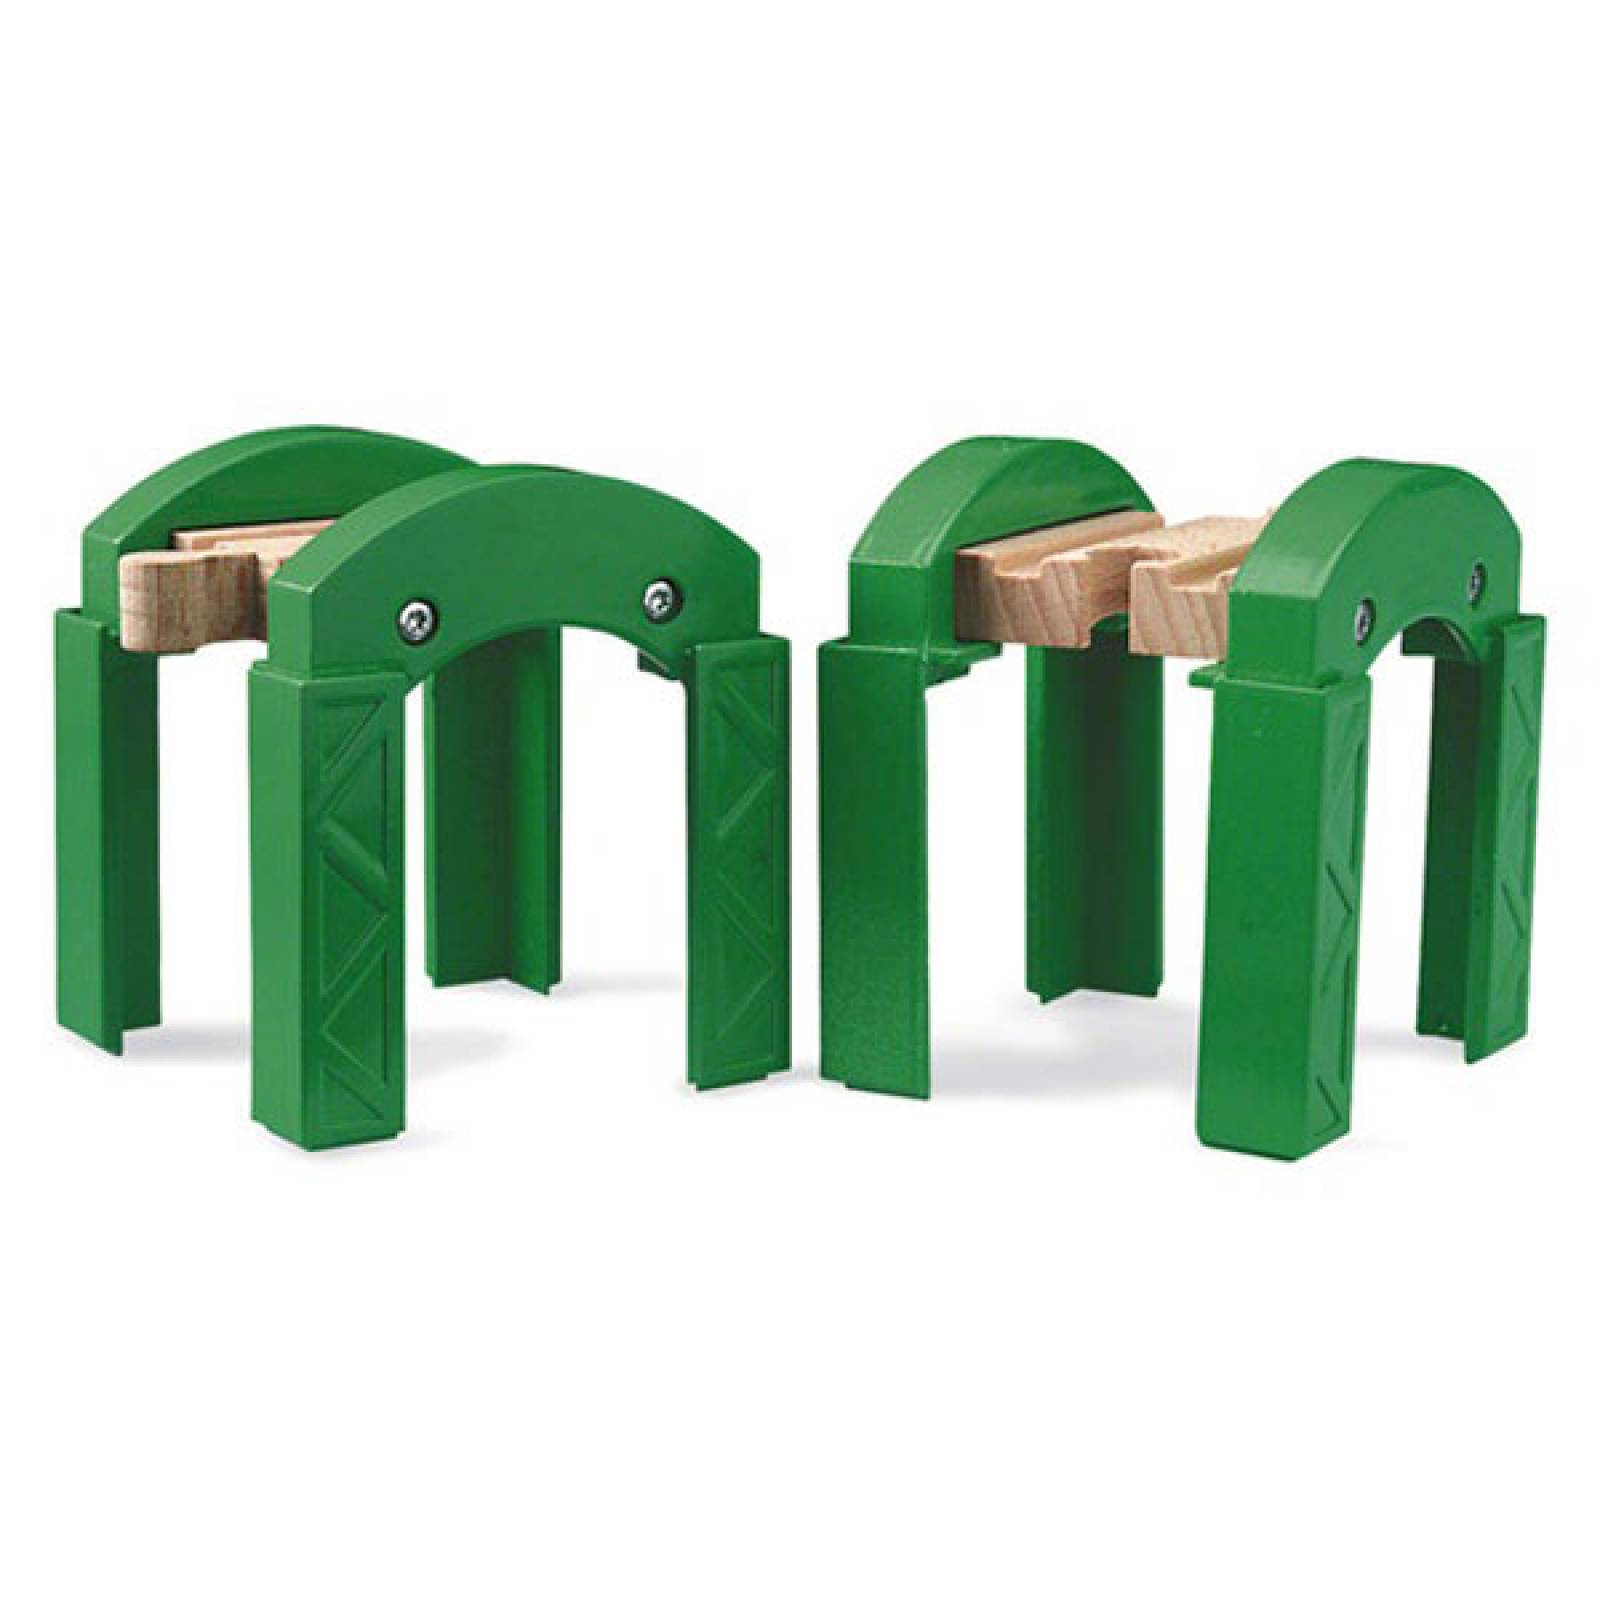 Stacking Track Support BRIO Wooden Railway Age 3+